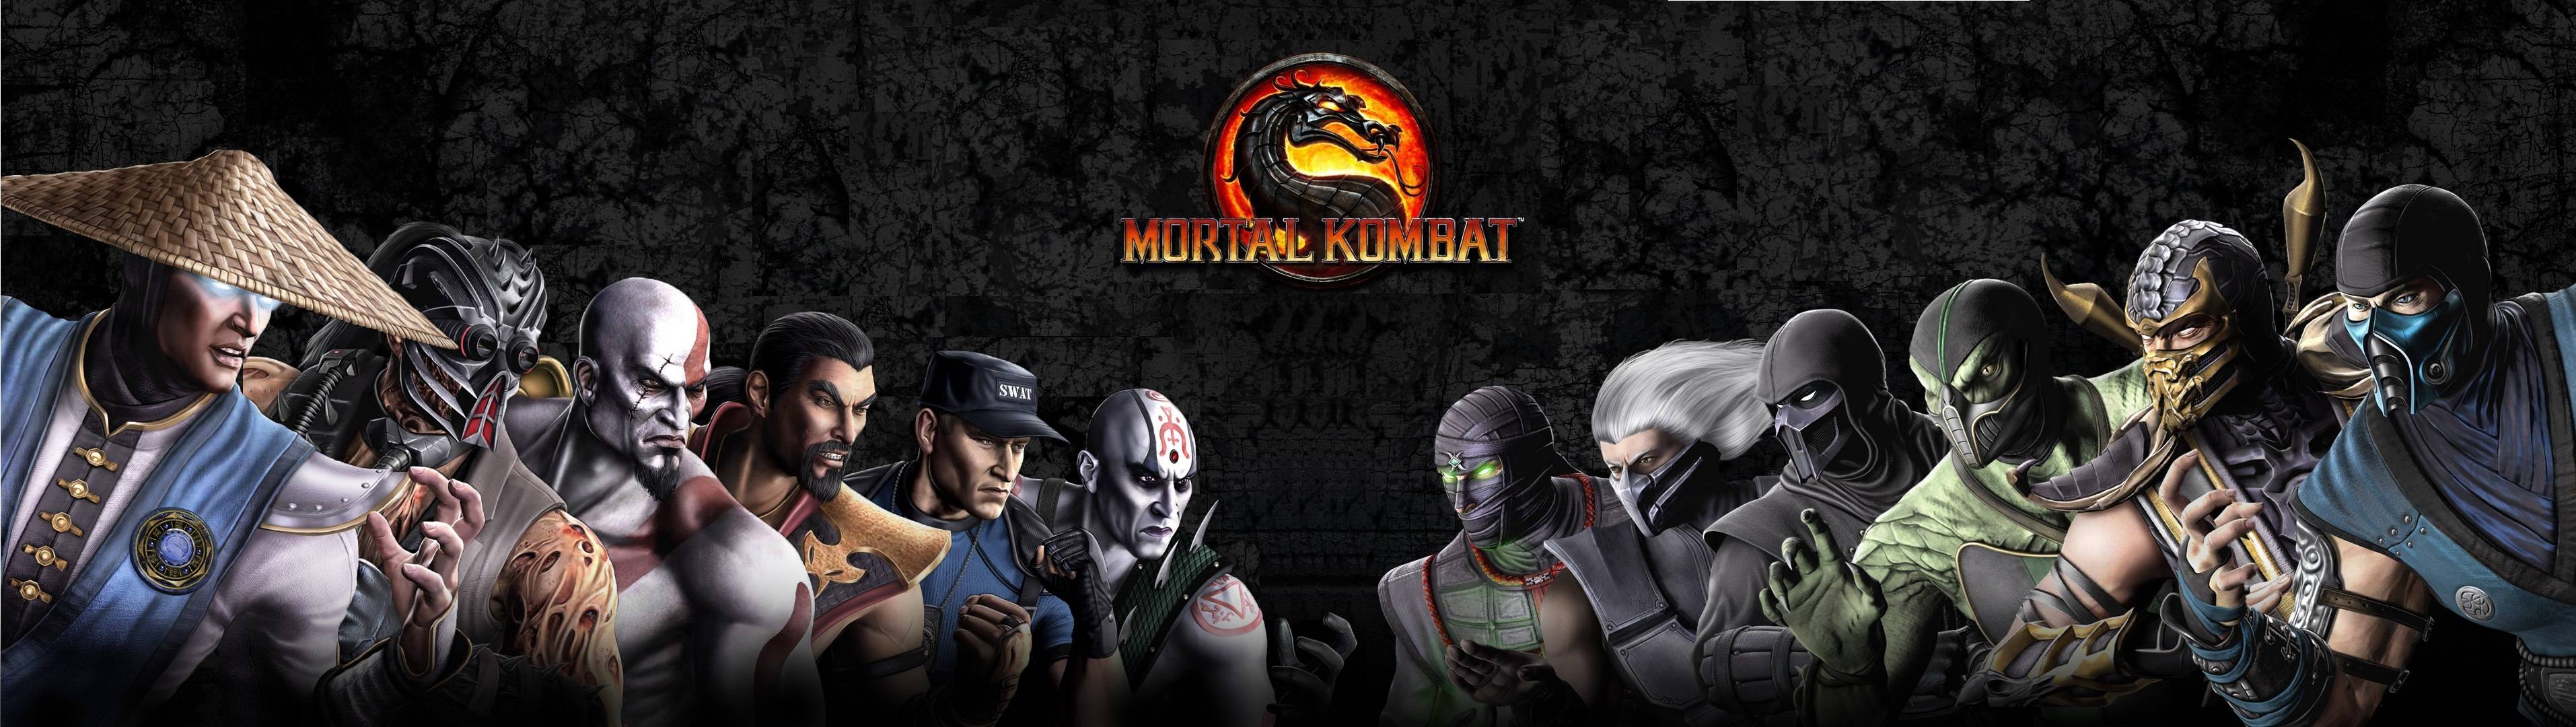 Pin Mortal Kombat Character Pros Pictures